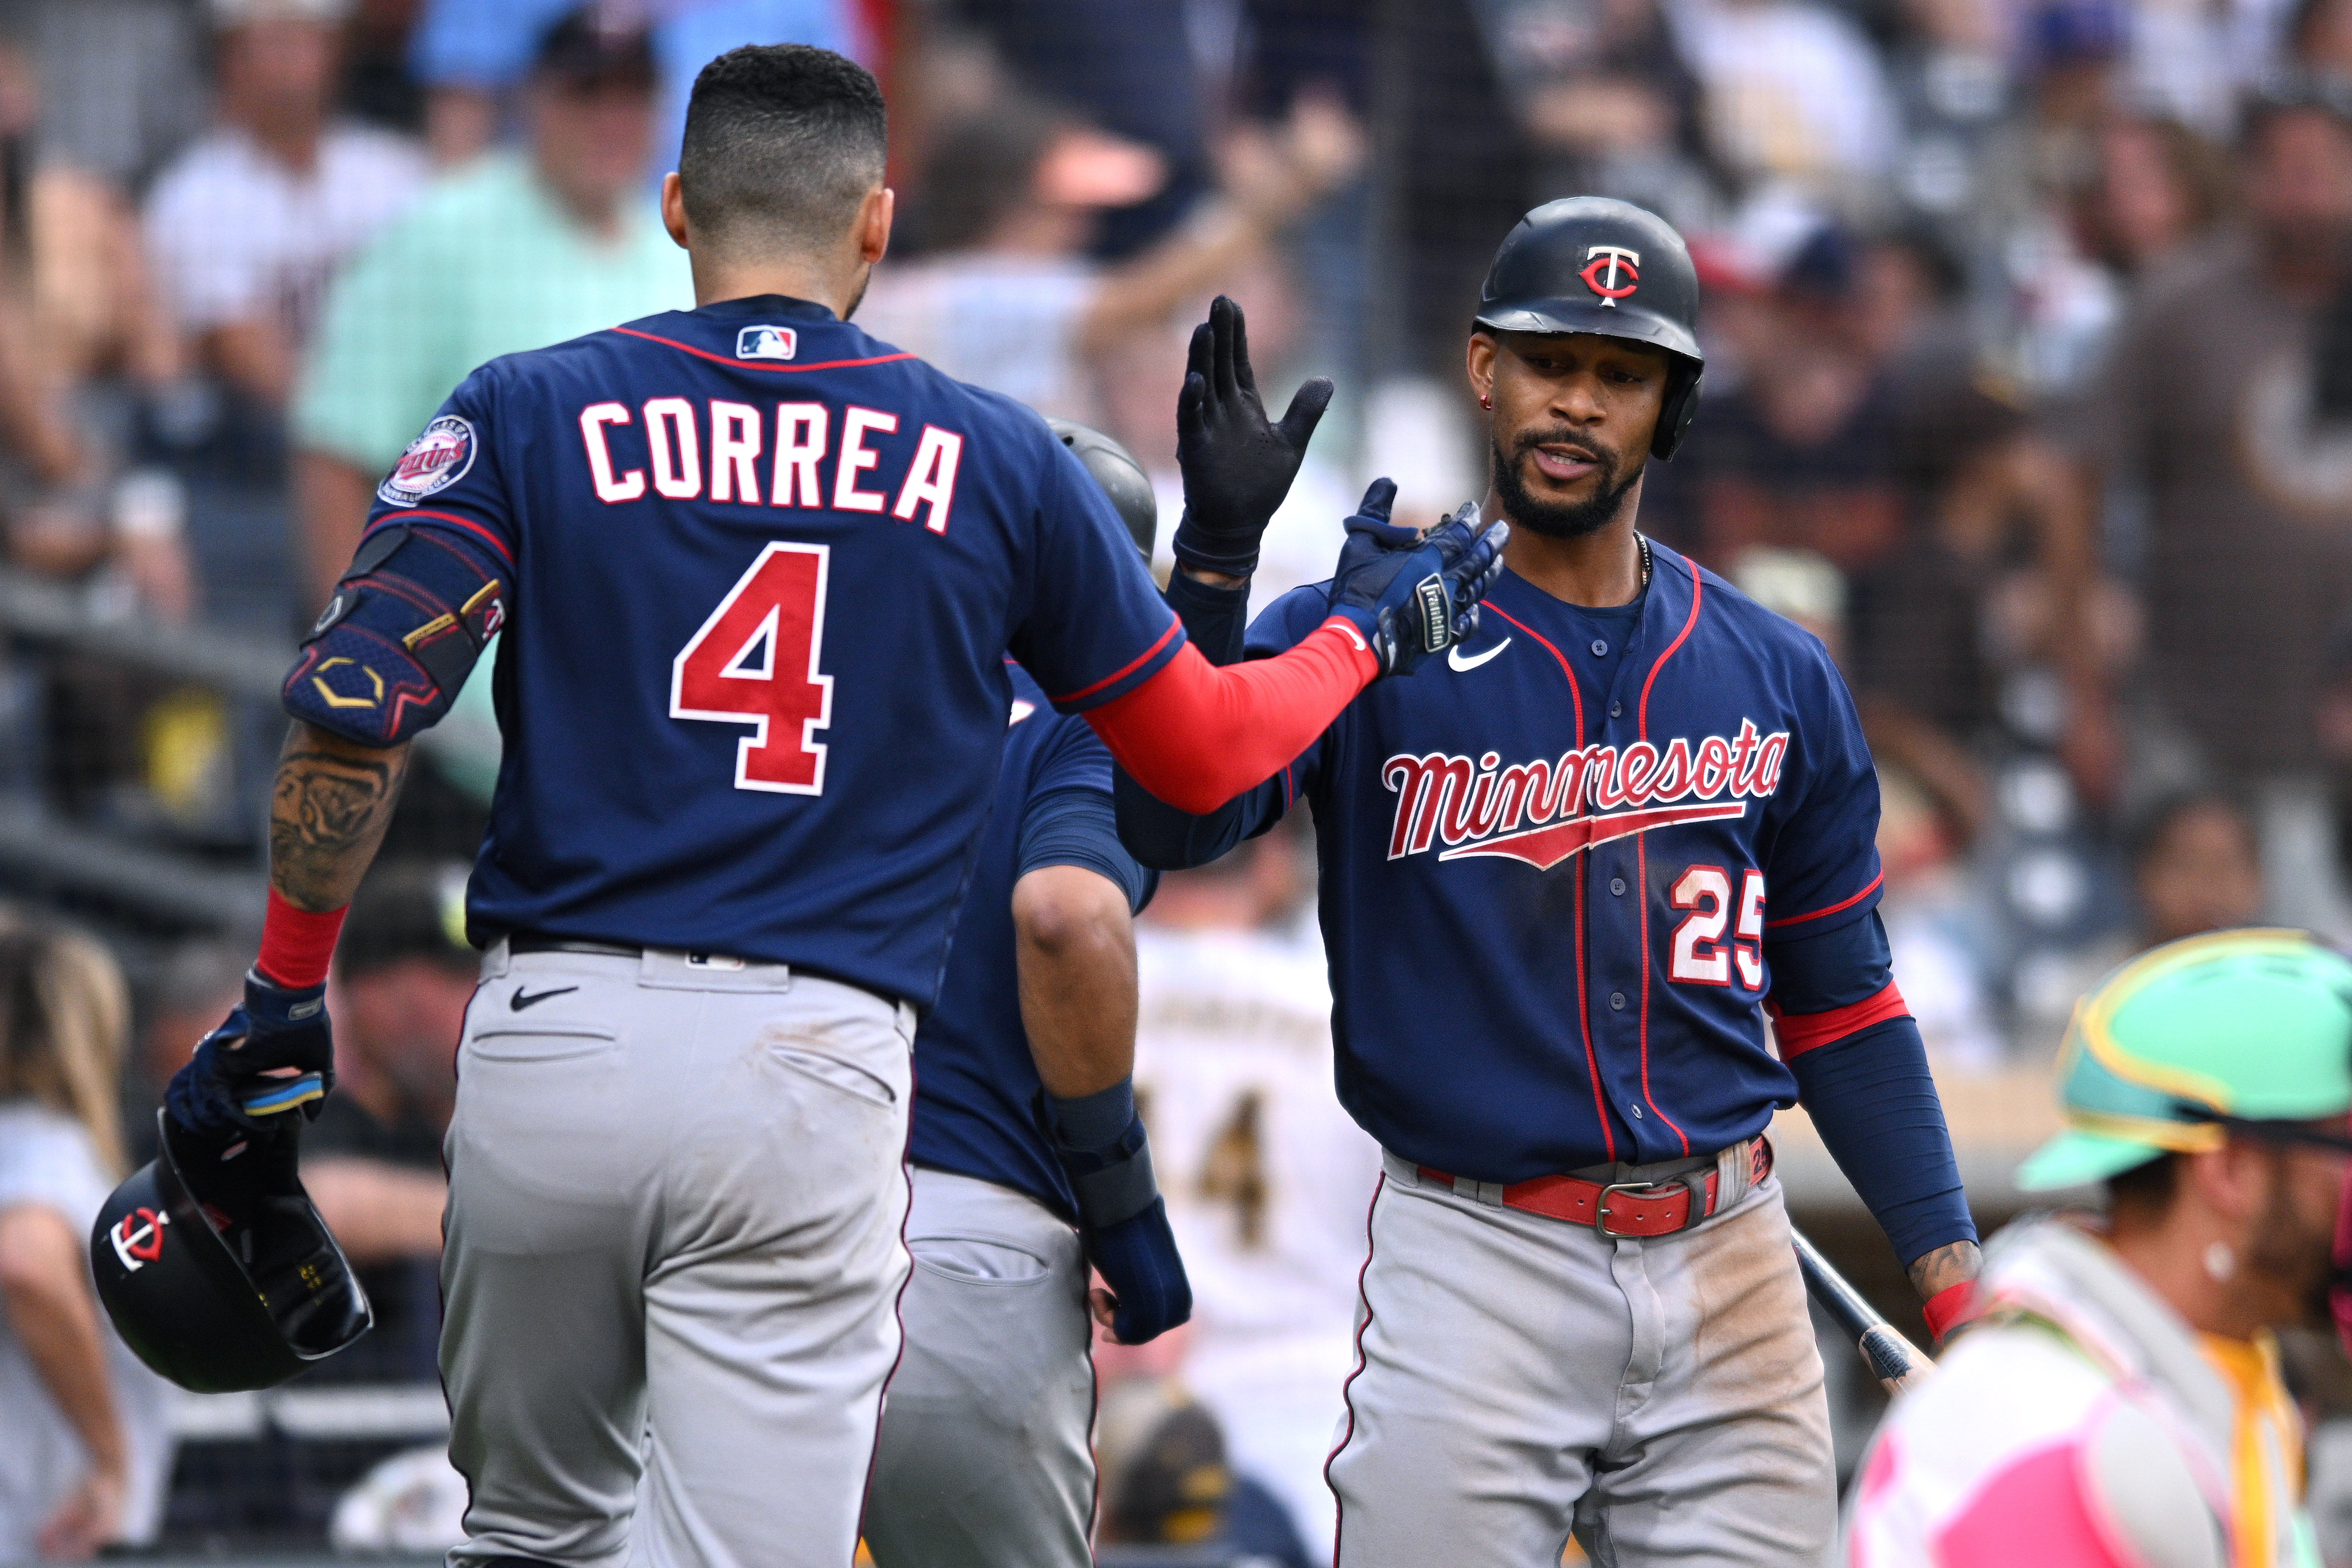 Updated Minnesota Twins projected wins after signing Carlos Correa